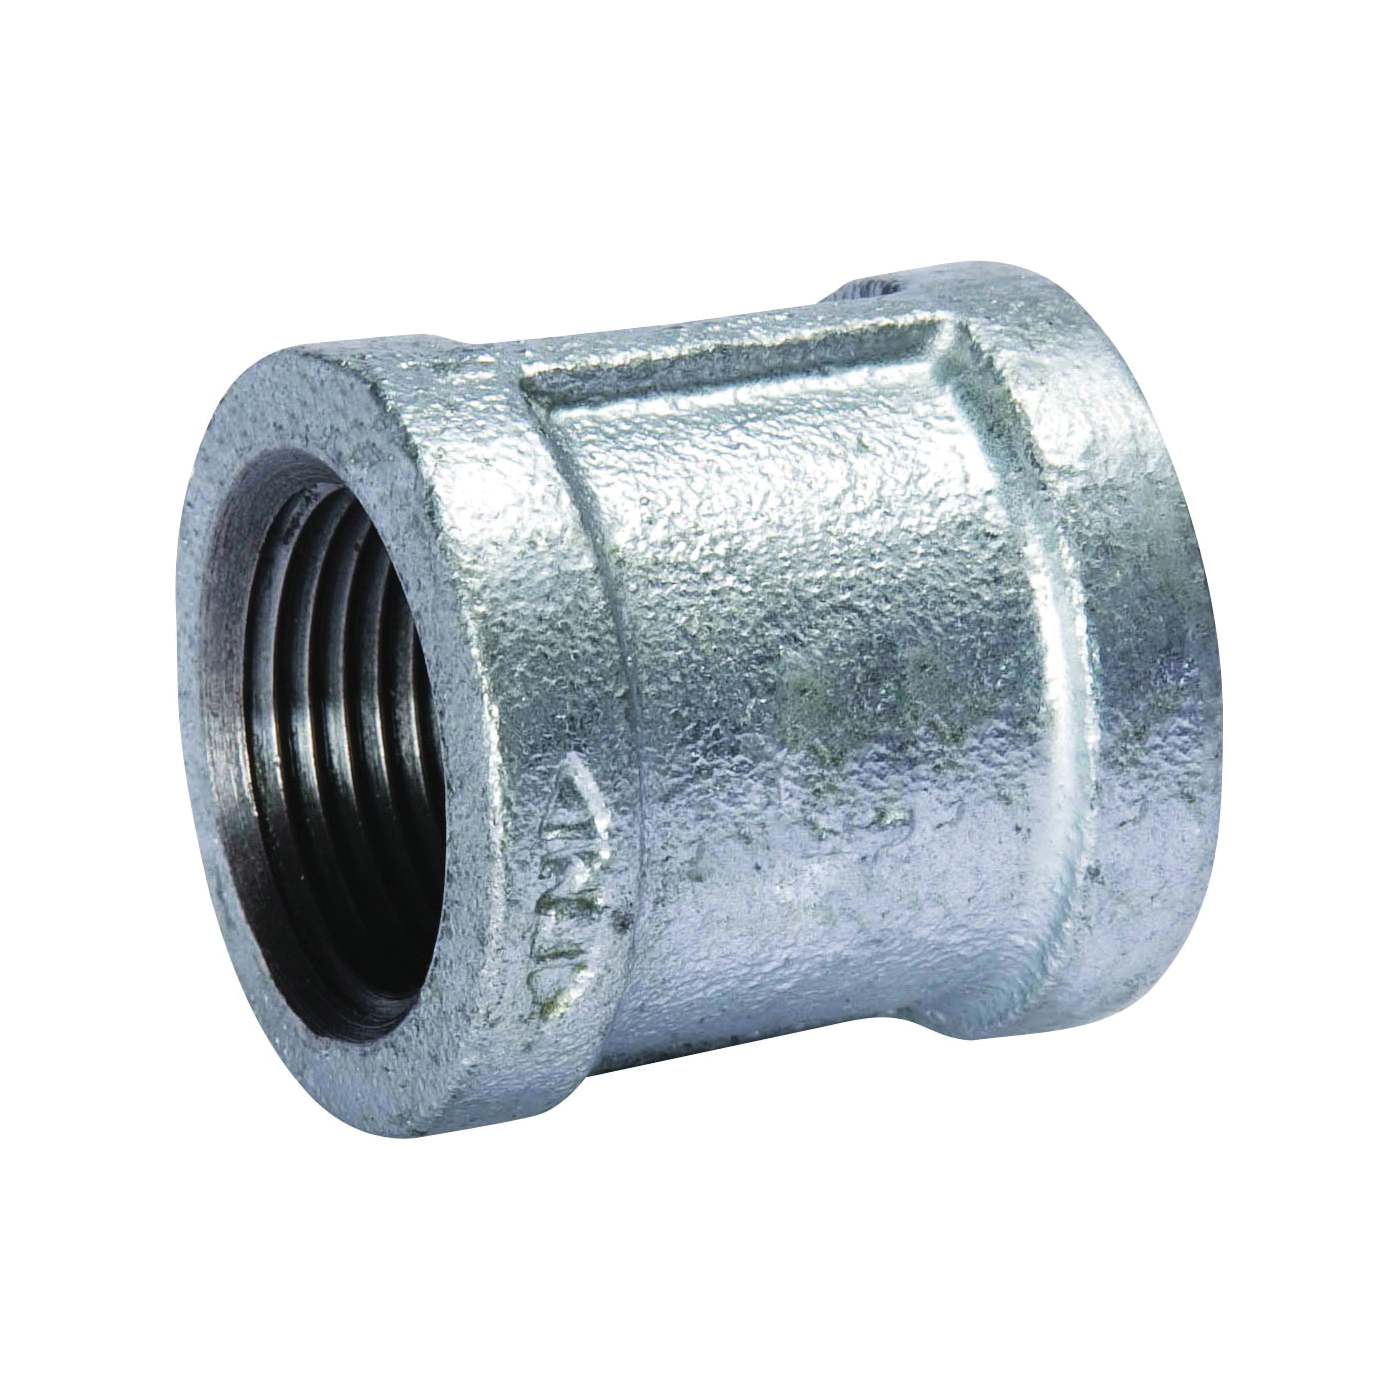 511-211BC Pipe Coupling, 4 in, Threaded, 150 psi Pressure